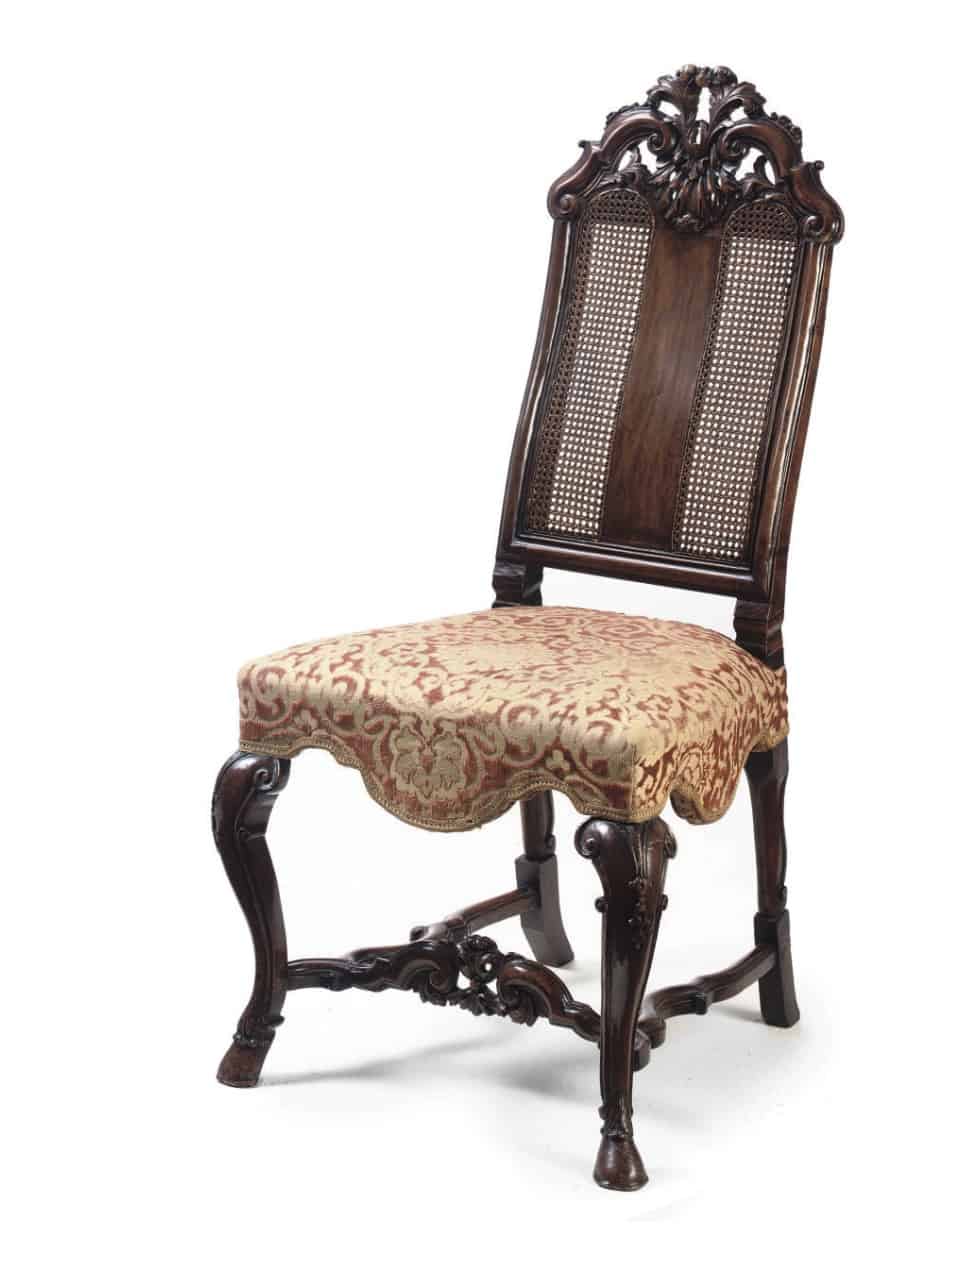 Queen Anne Carved Walnut and Beech Side Chair - Circa. 18th Century